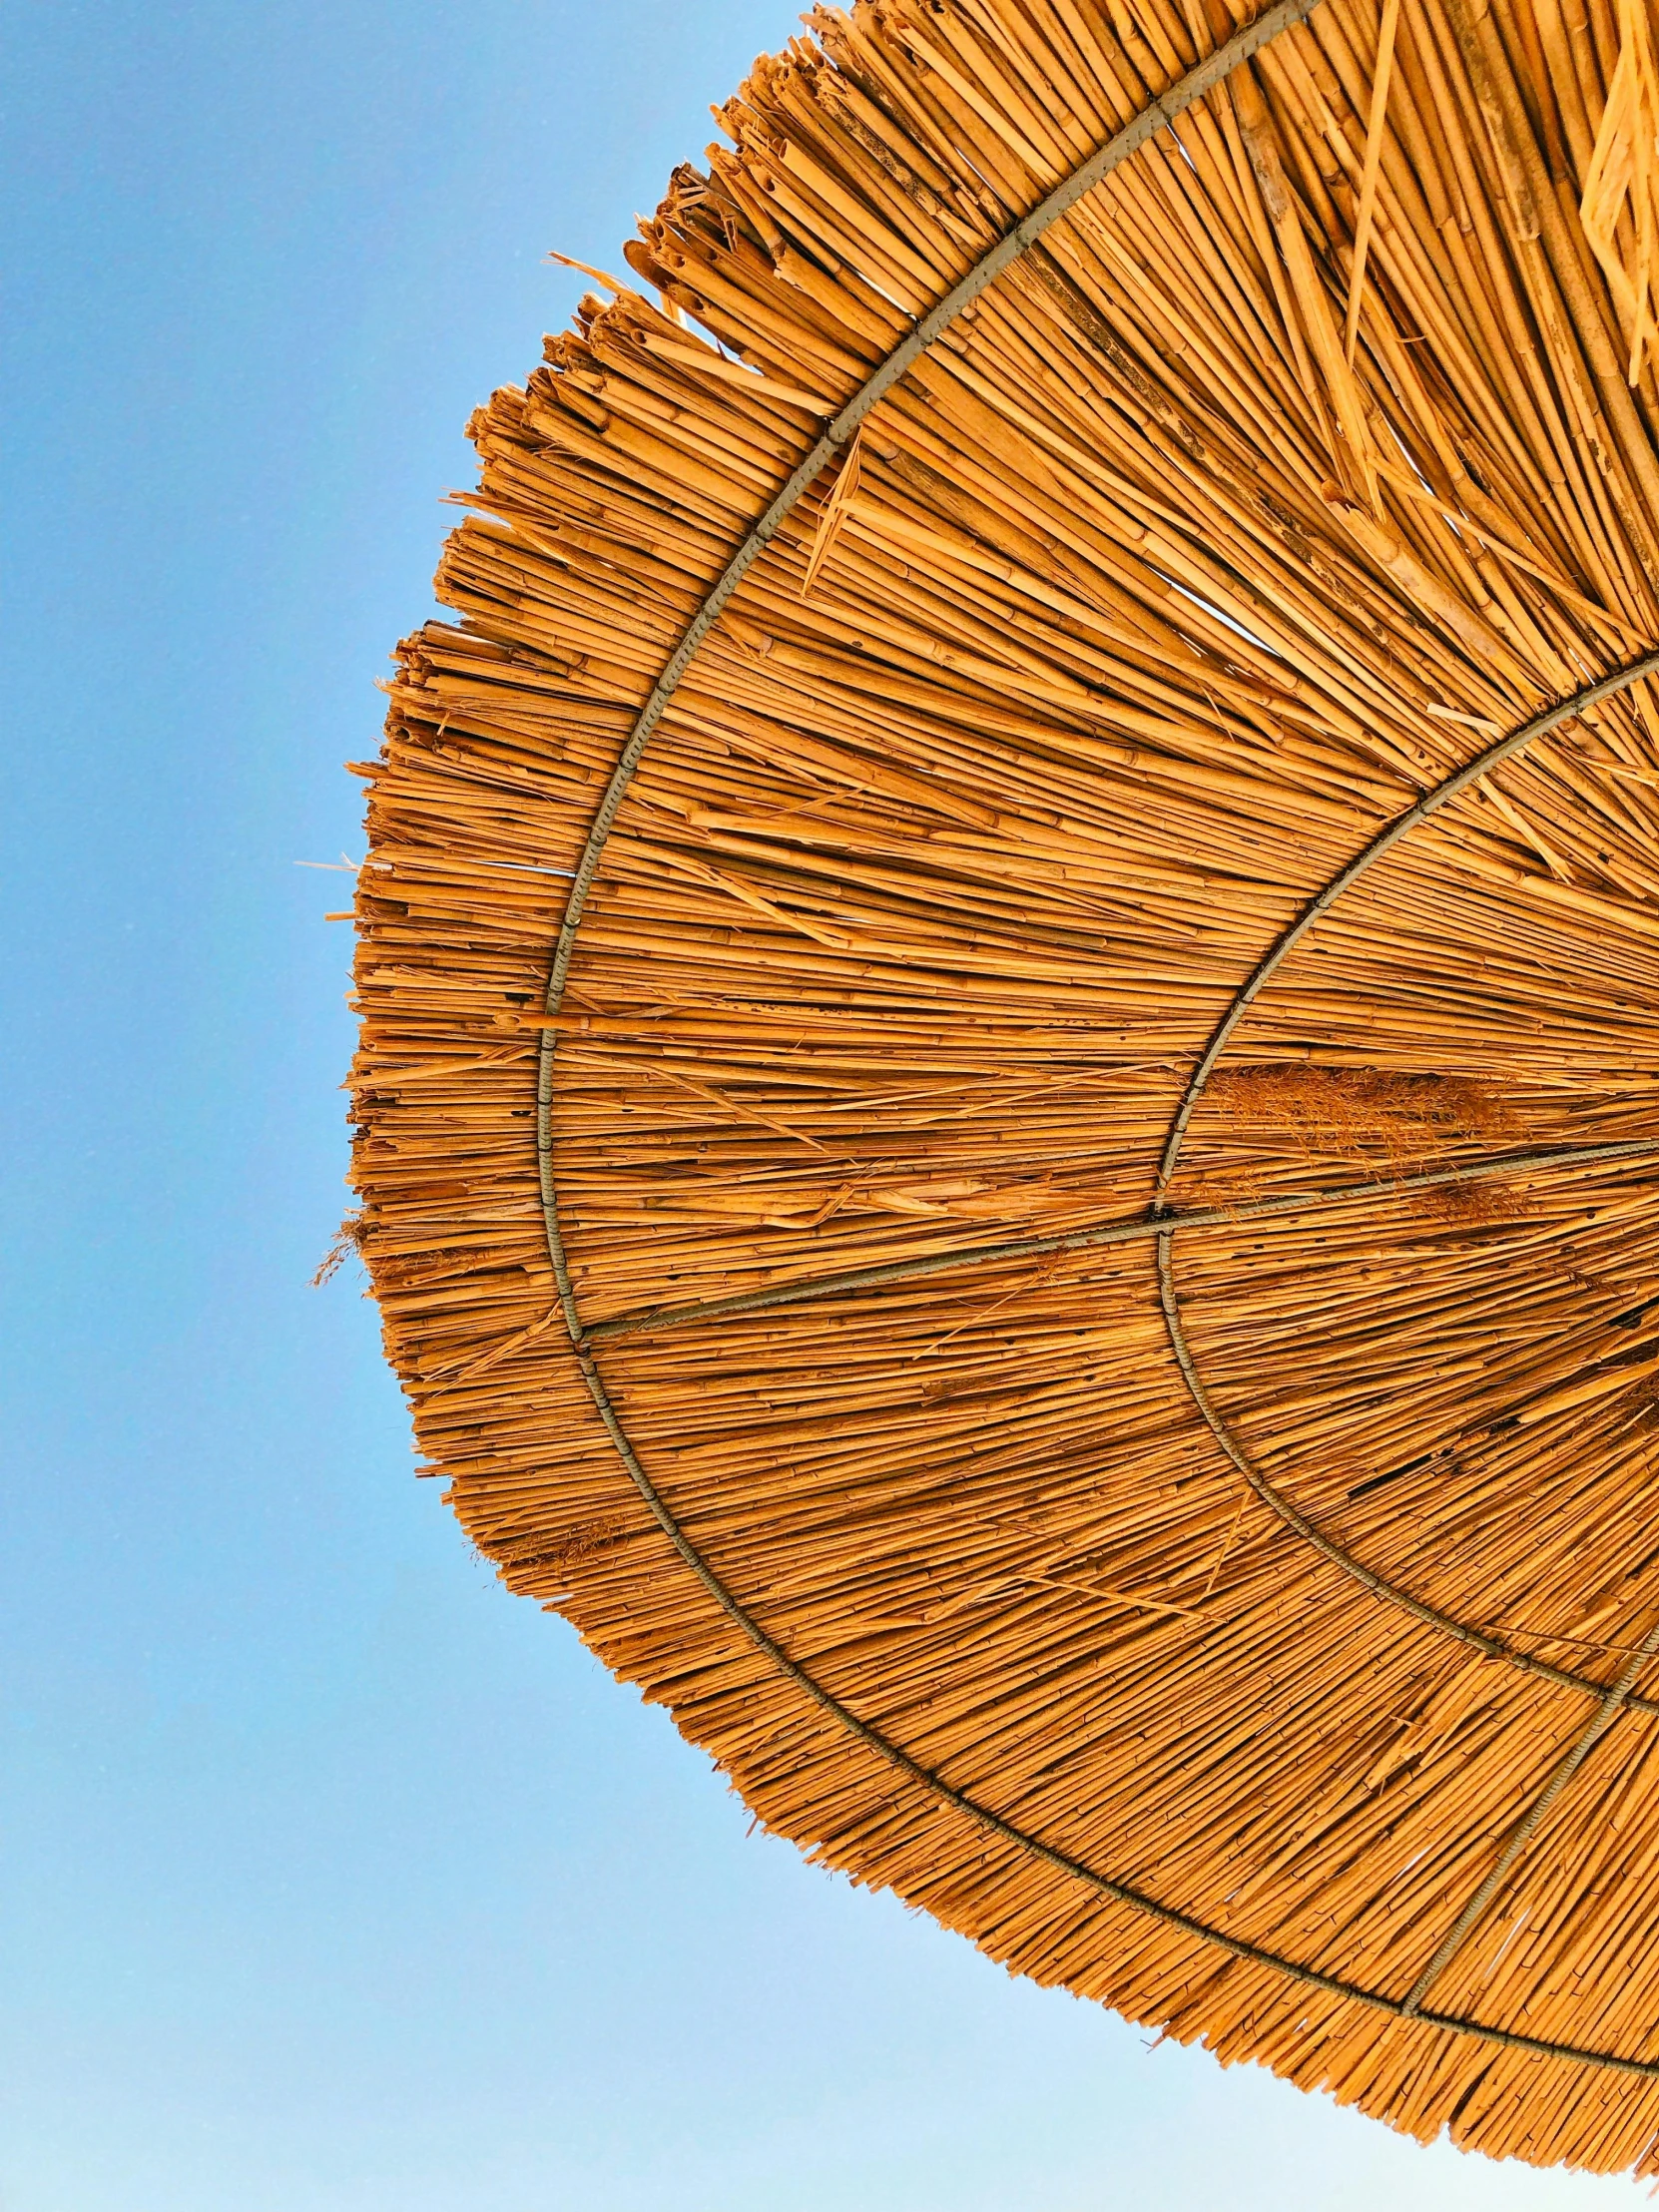 the top of a large straw umbrella on a sunny day